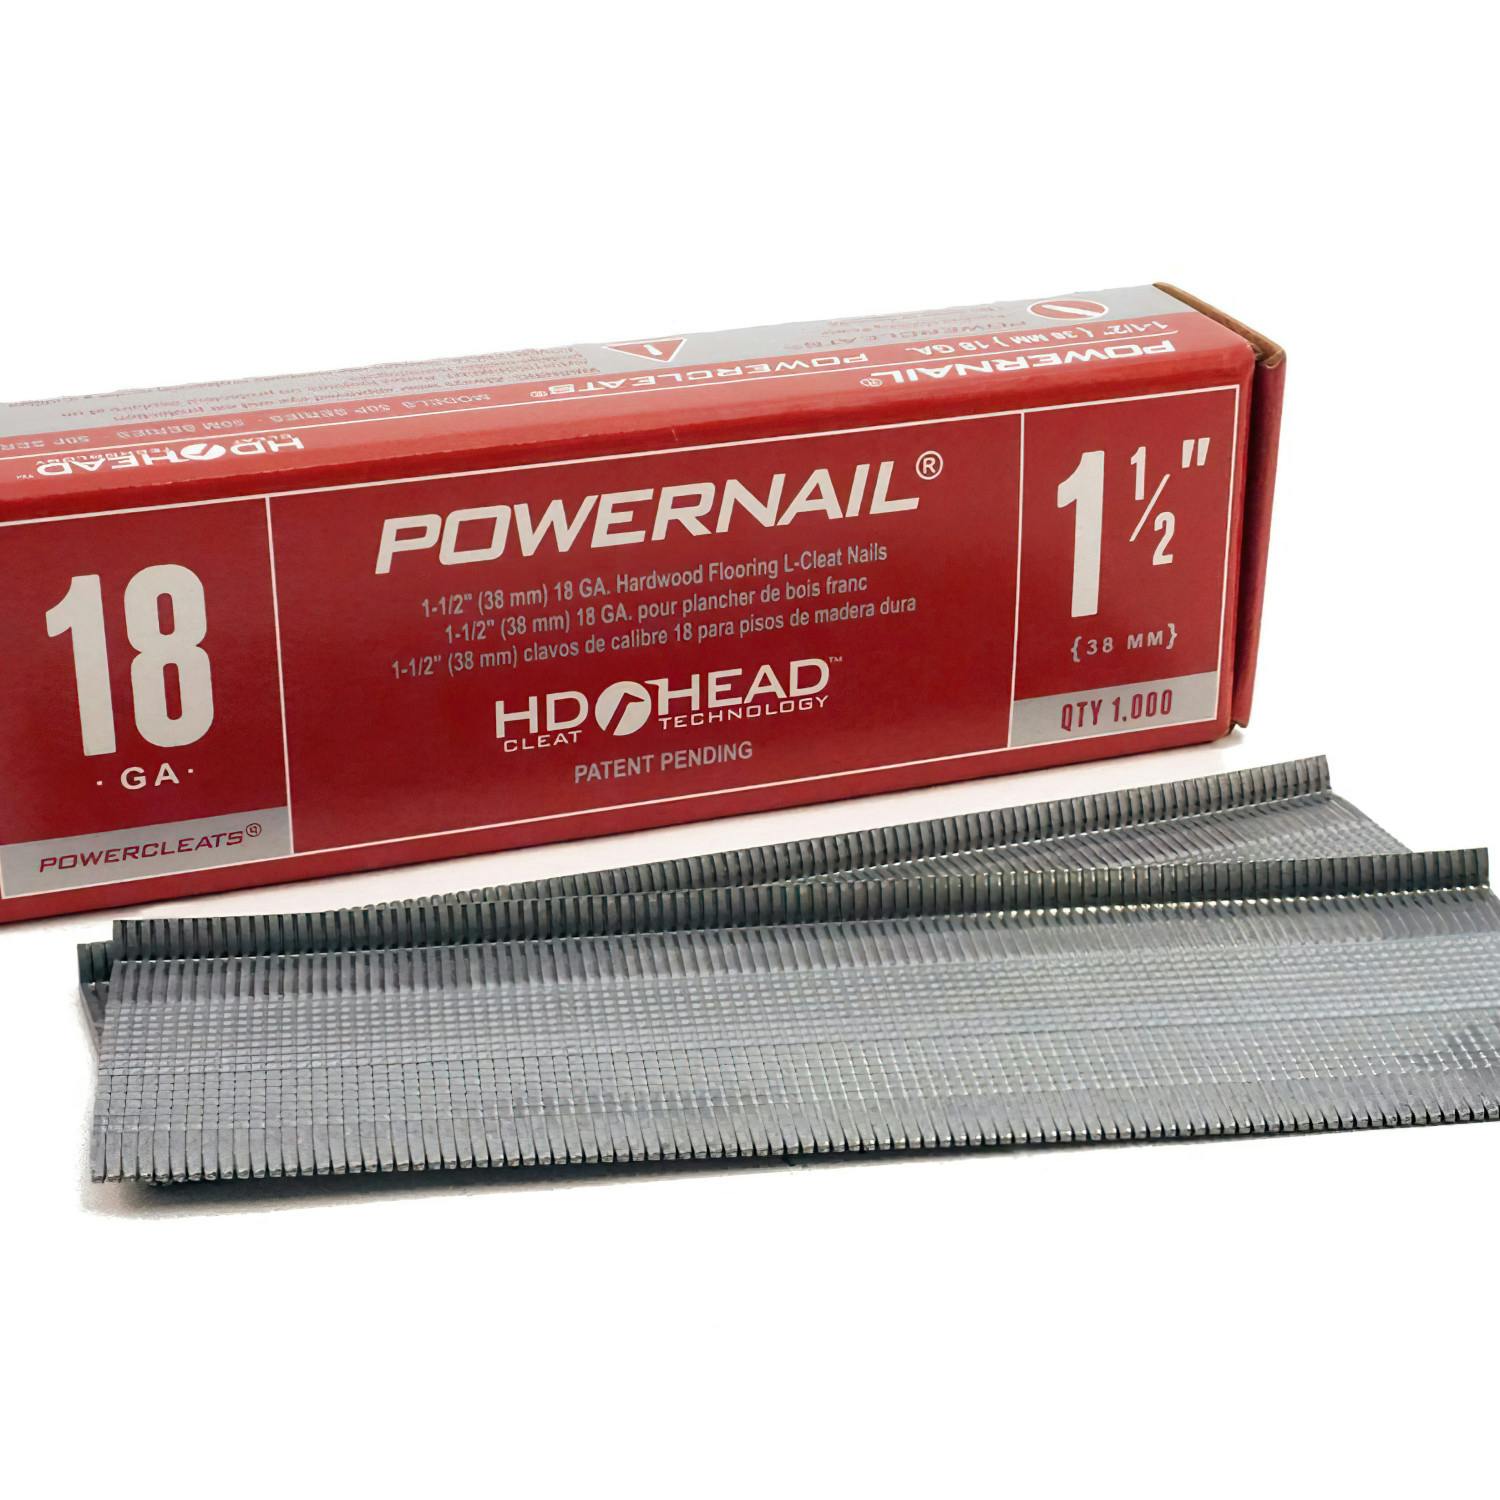 Powernail 18-Gauge 1-1/2 in. L-Shaped Cleat Nails